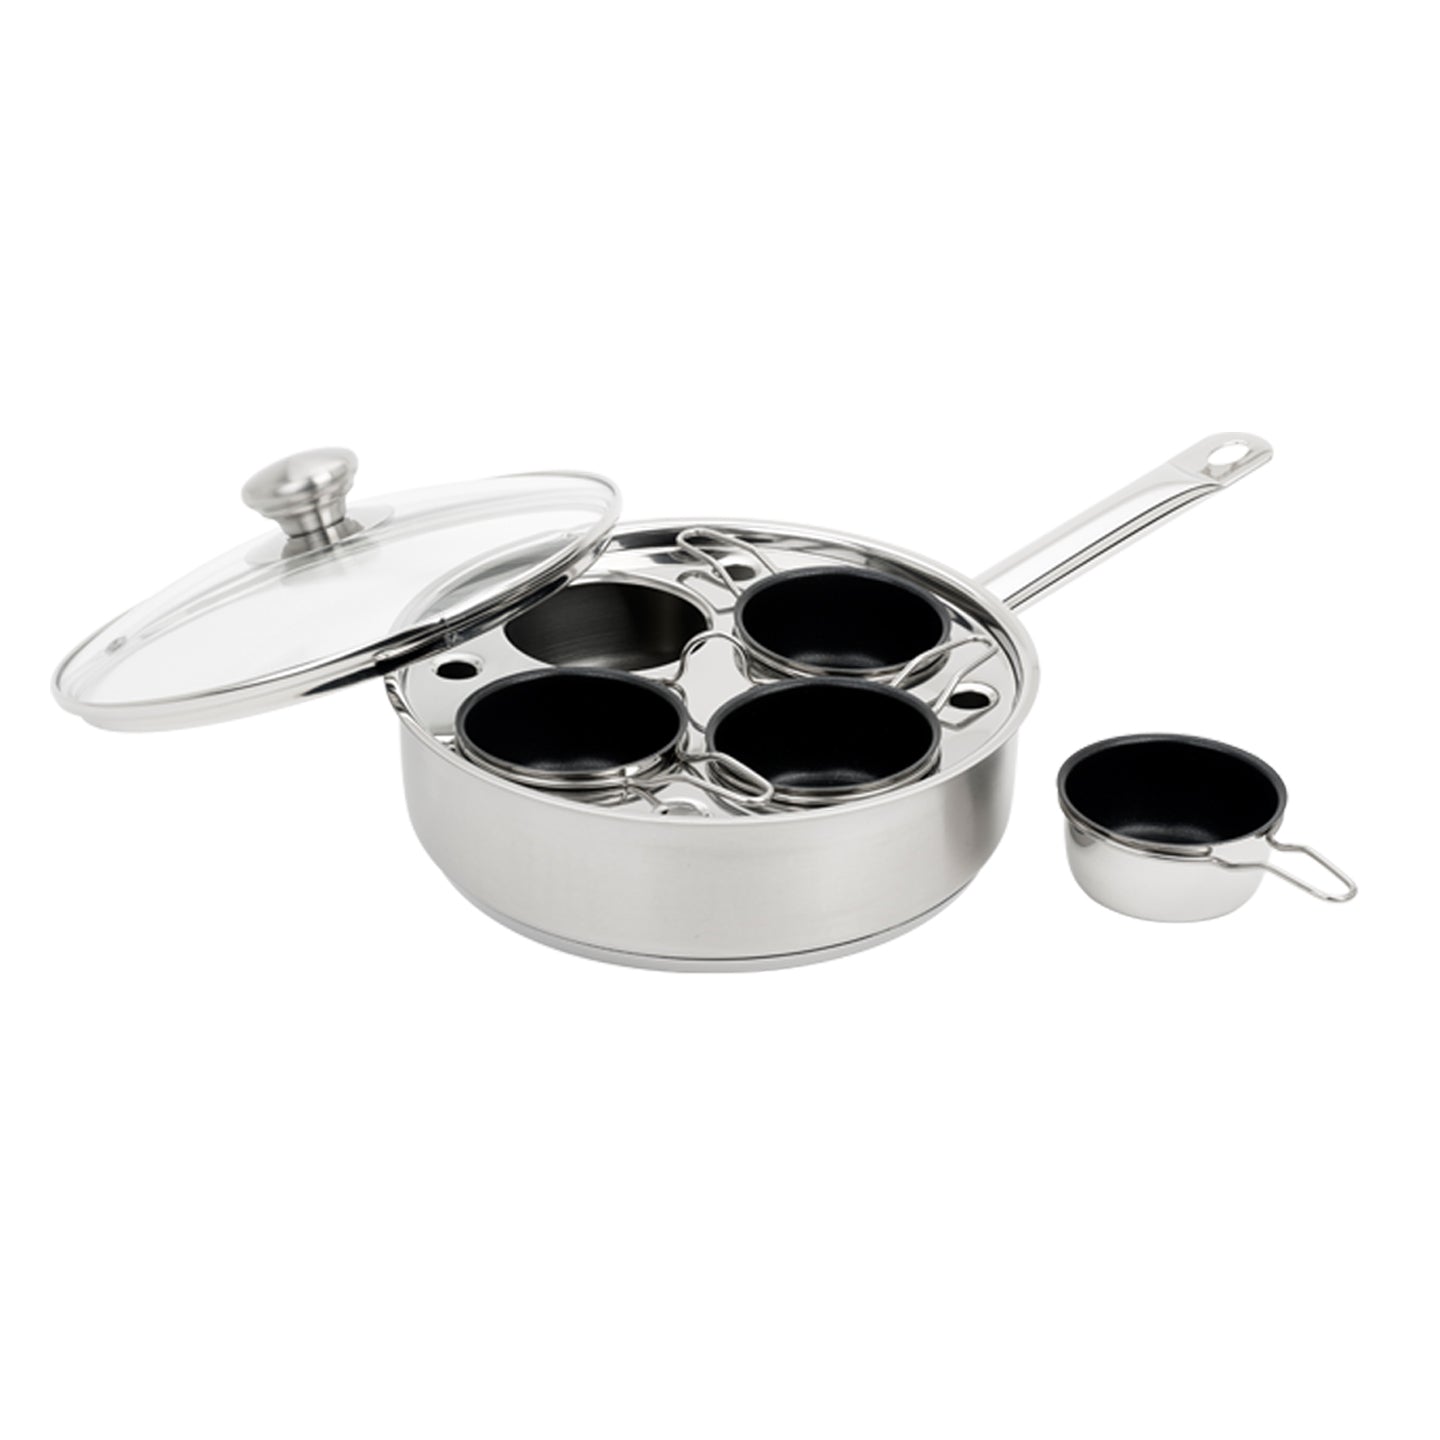 Demeyere Resto 4-Cup Stainless Steel Egg Poacher Set + Reviews